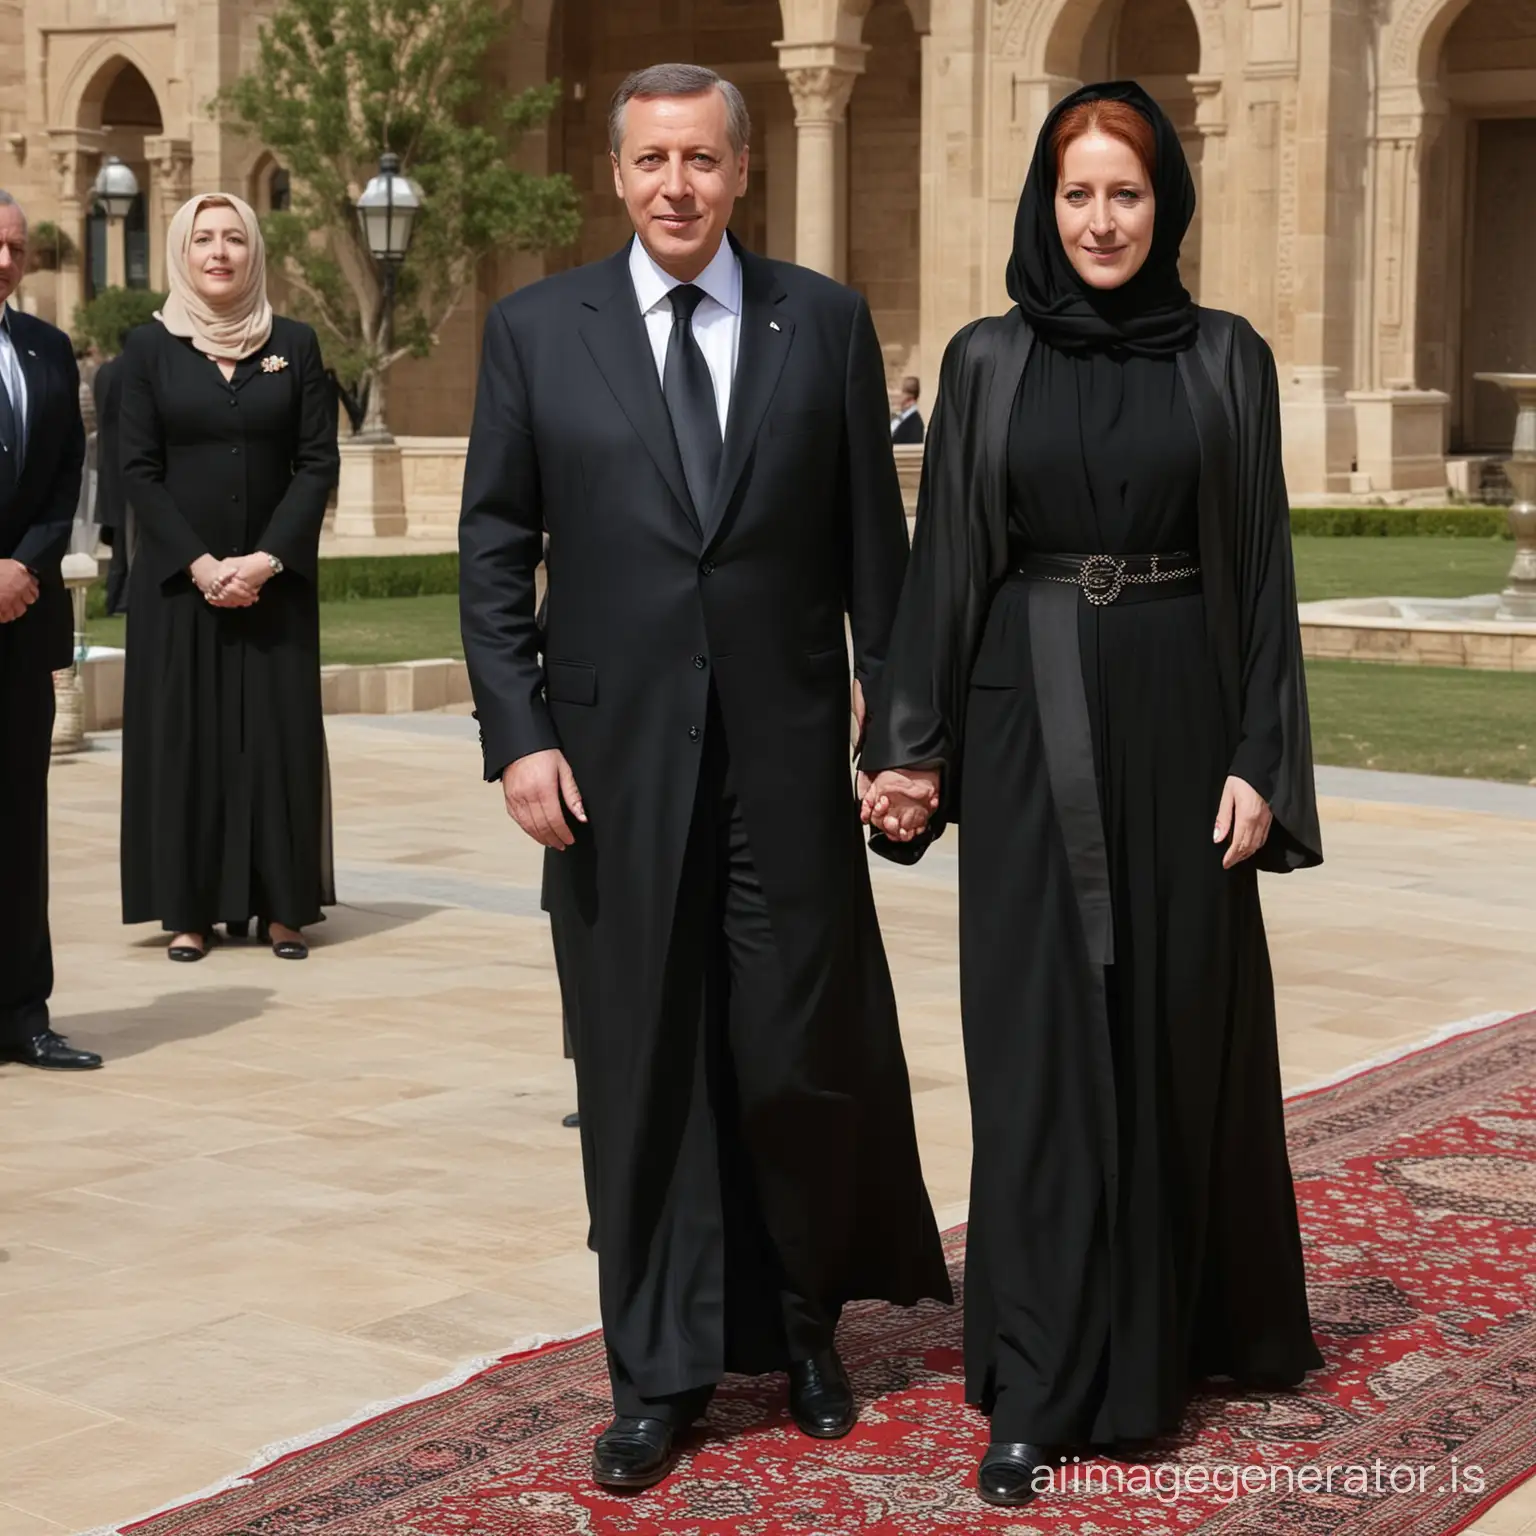 red haired Gillian Anderson with President Erdogan, he asked Gillian to dress accordingly to his Muslim faith and wear a floor-length black abaya with long black hijab and stand demurely beside him as  his newlywed devoted loving wife